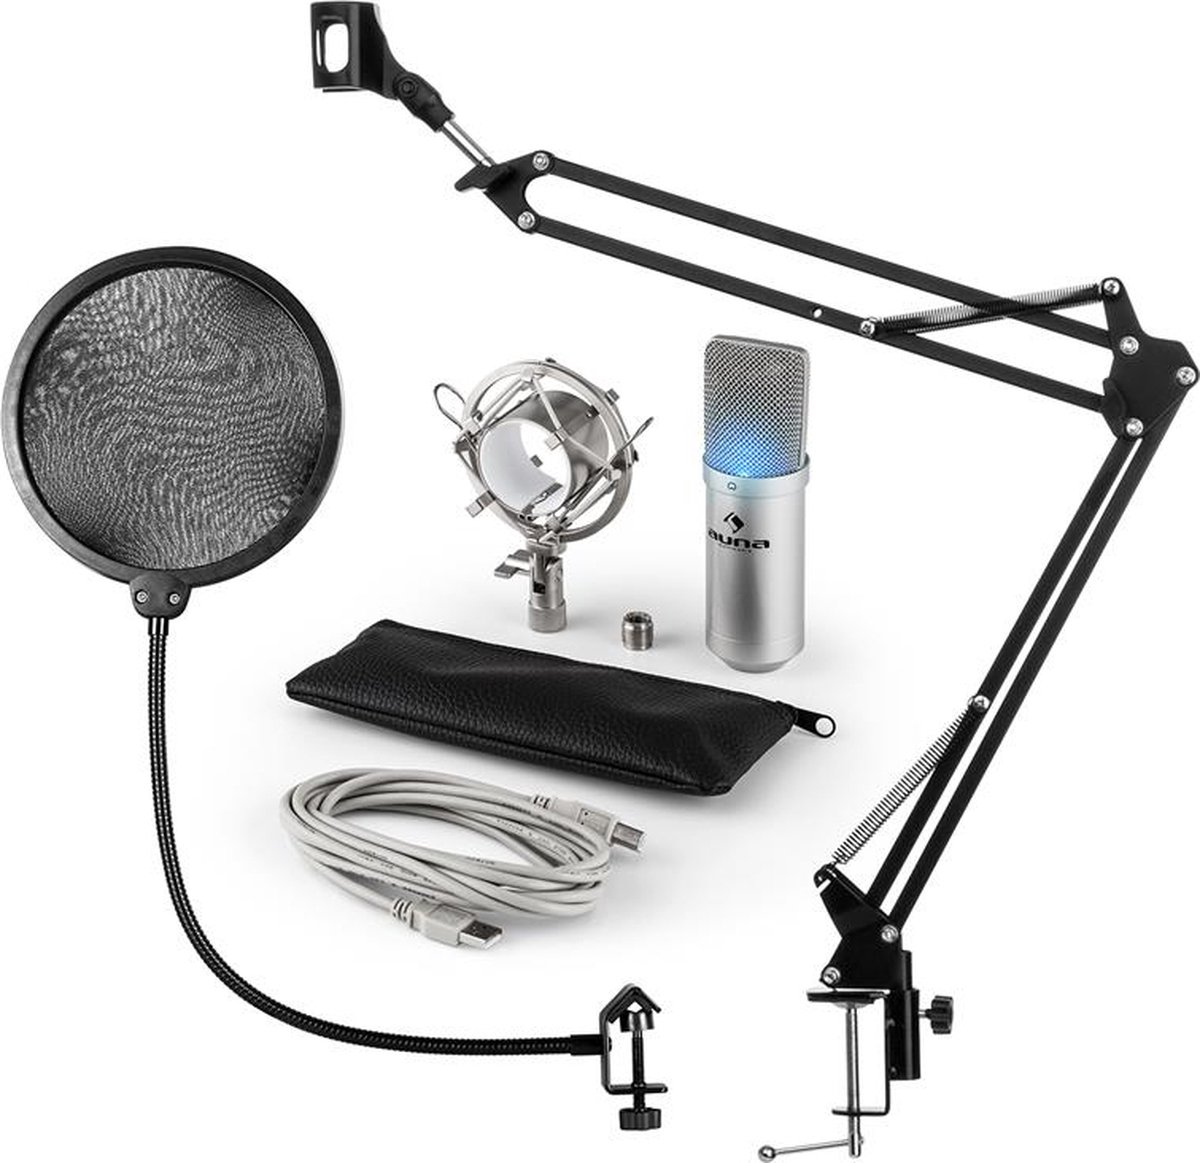 MIC-900S-LED USB microfoonset V4 condensatormicrofoon plopbescherming arm led - zilver